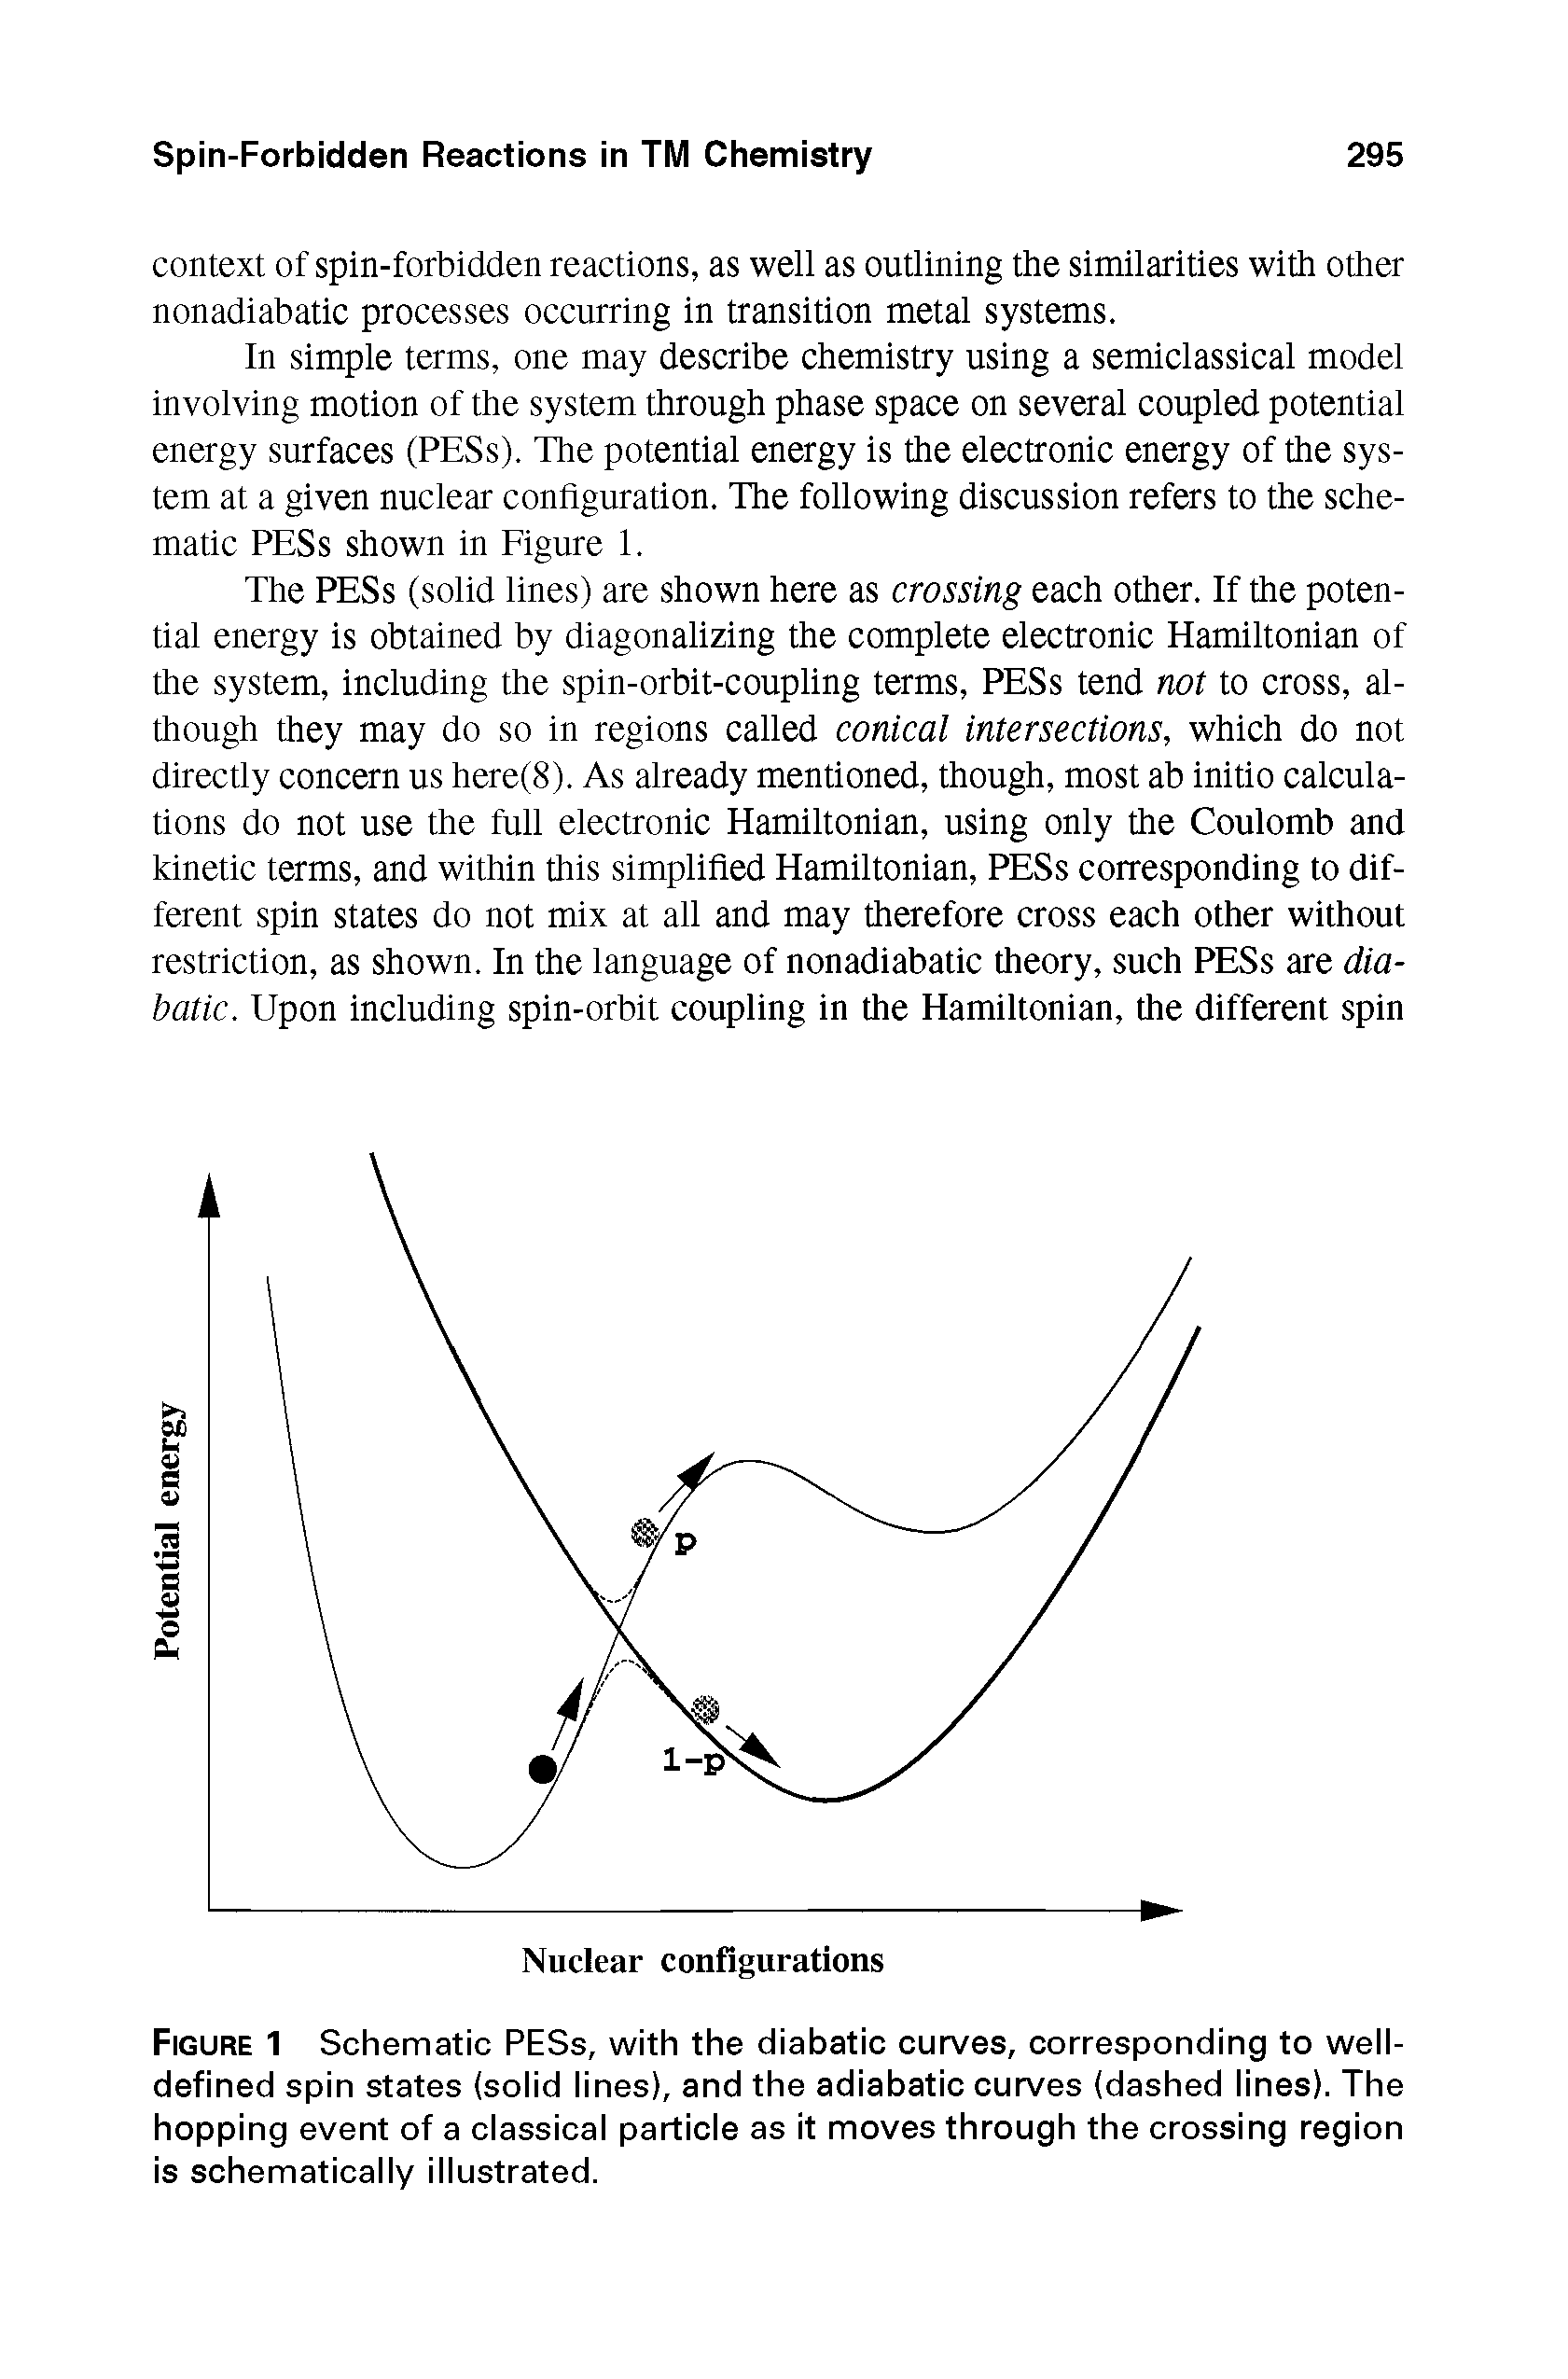 Figure 1 Schematic PESs, with the diabatic curves, corresponding to well-defined spin states (solid lines), and the adiabatic curves (dashed lines). The hopping event of a classical particle as it moves through the crossing region is schematically illustrated.